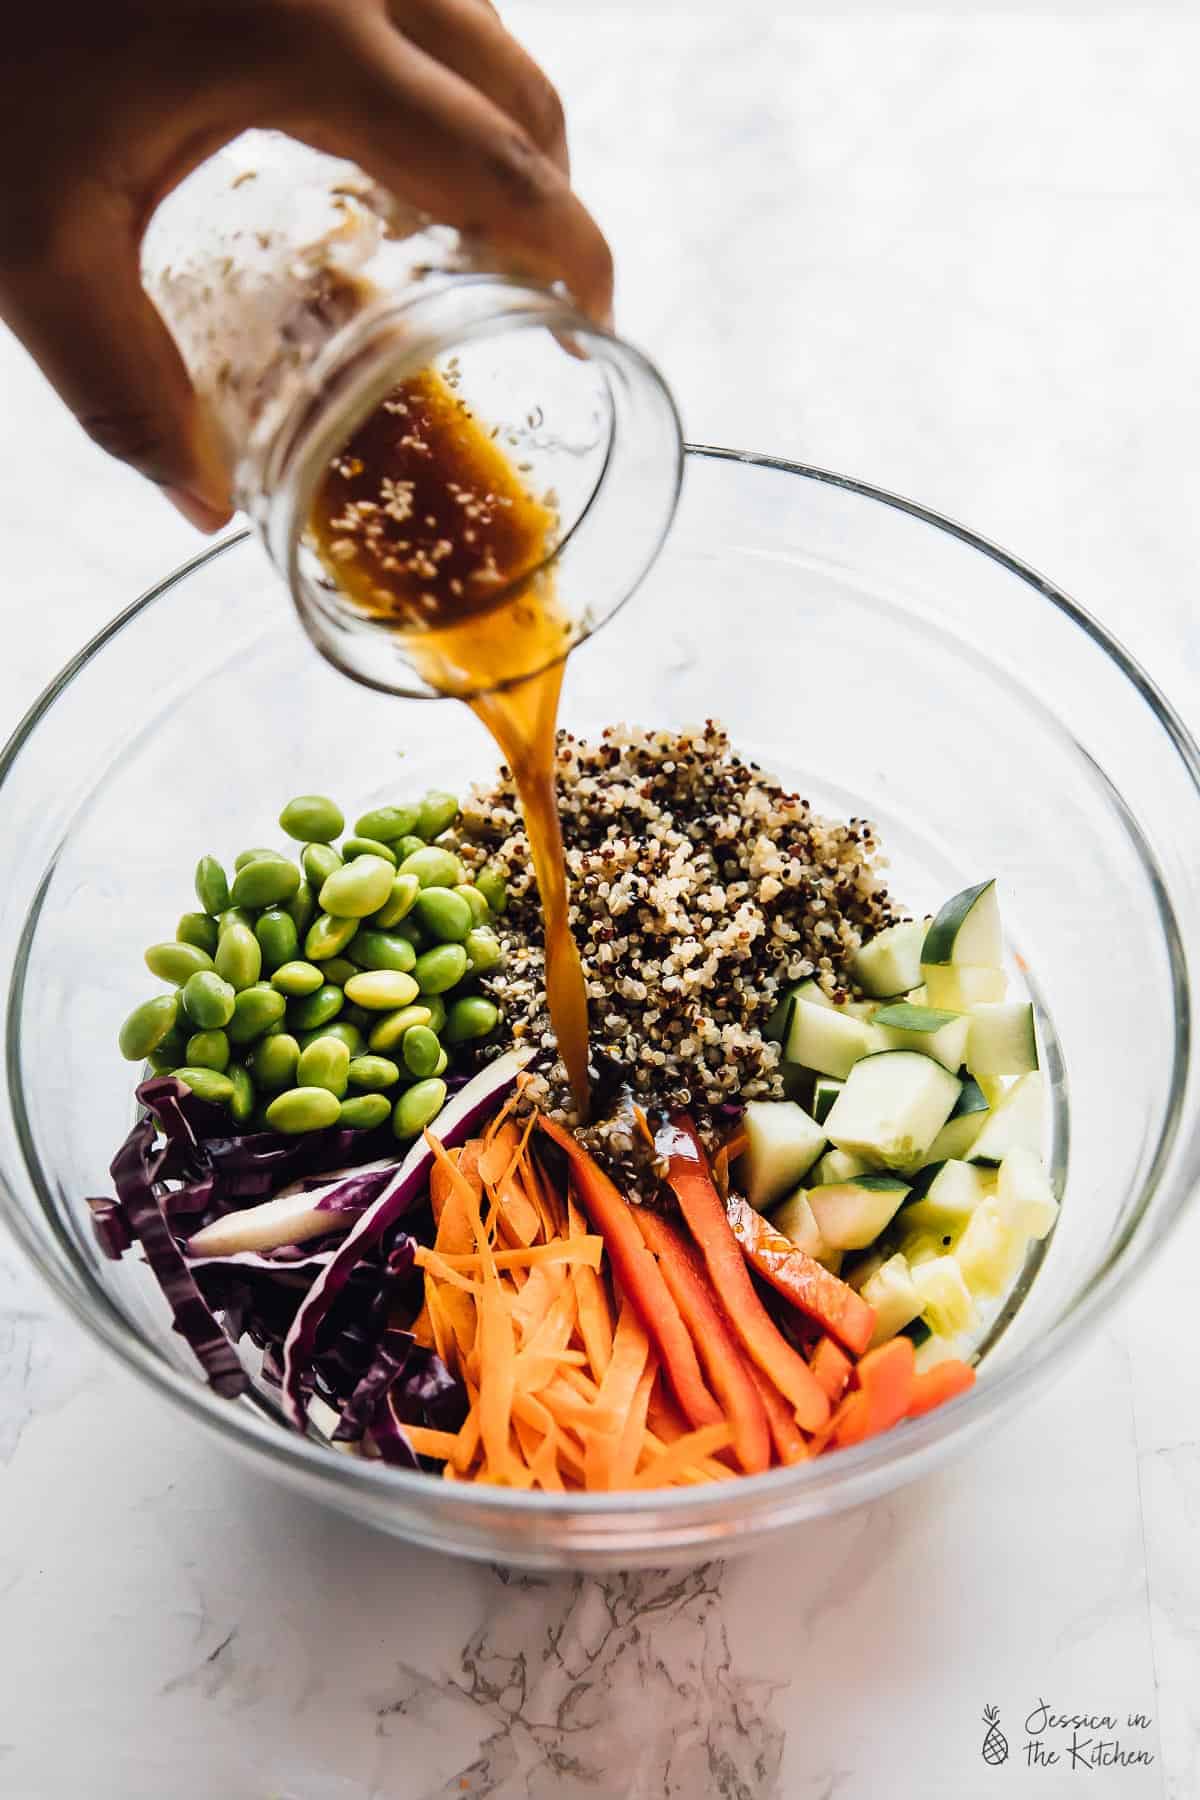 Pouring dressing into bowl of quinoa salad ingredients